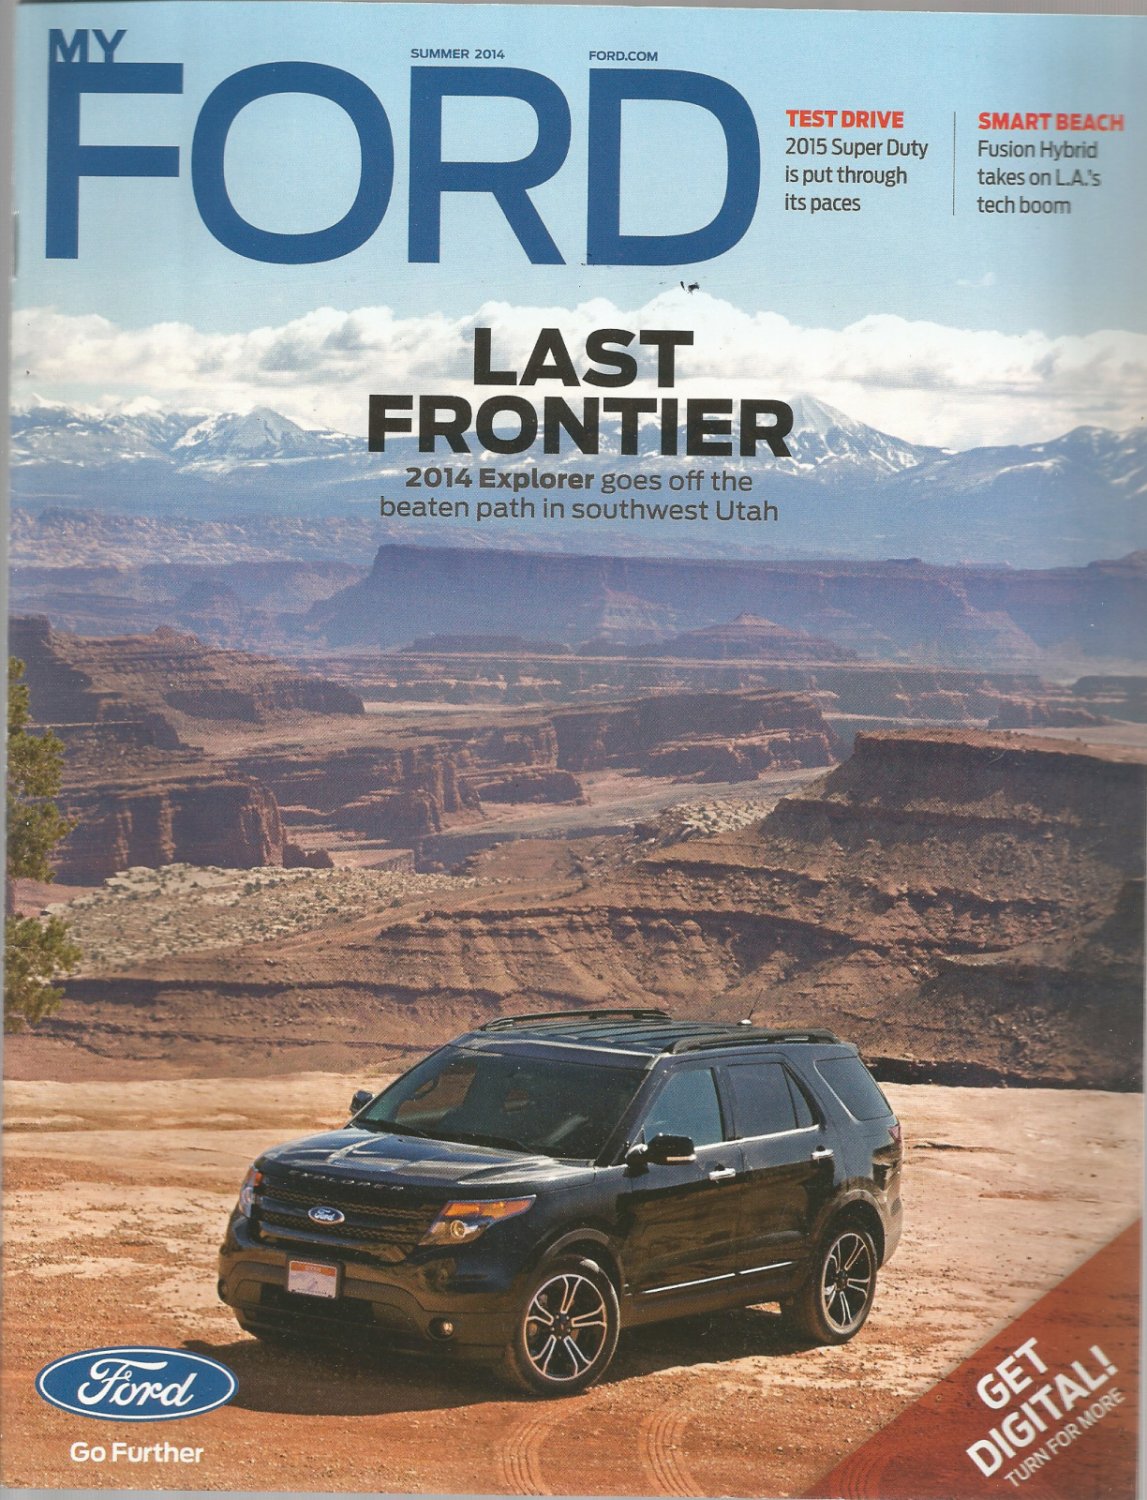 My Ford Magazine Summer 2014 The 2014 Explorer Goes Off The Beaten